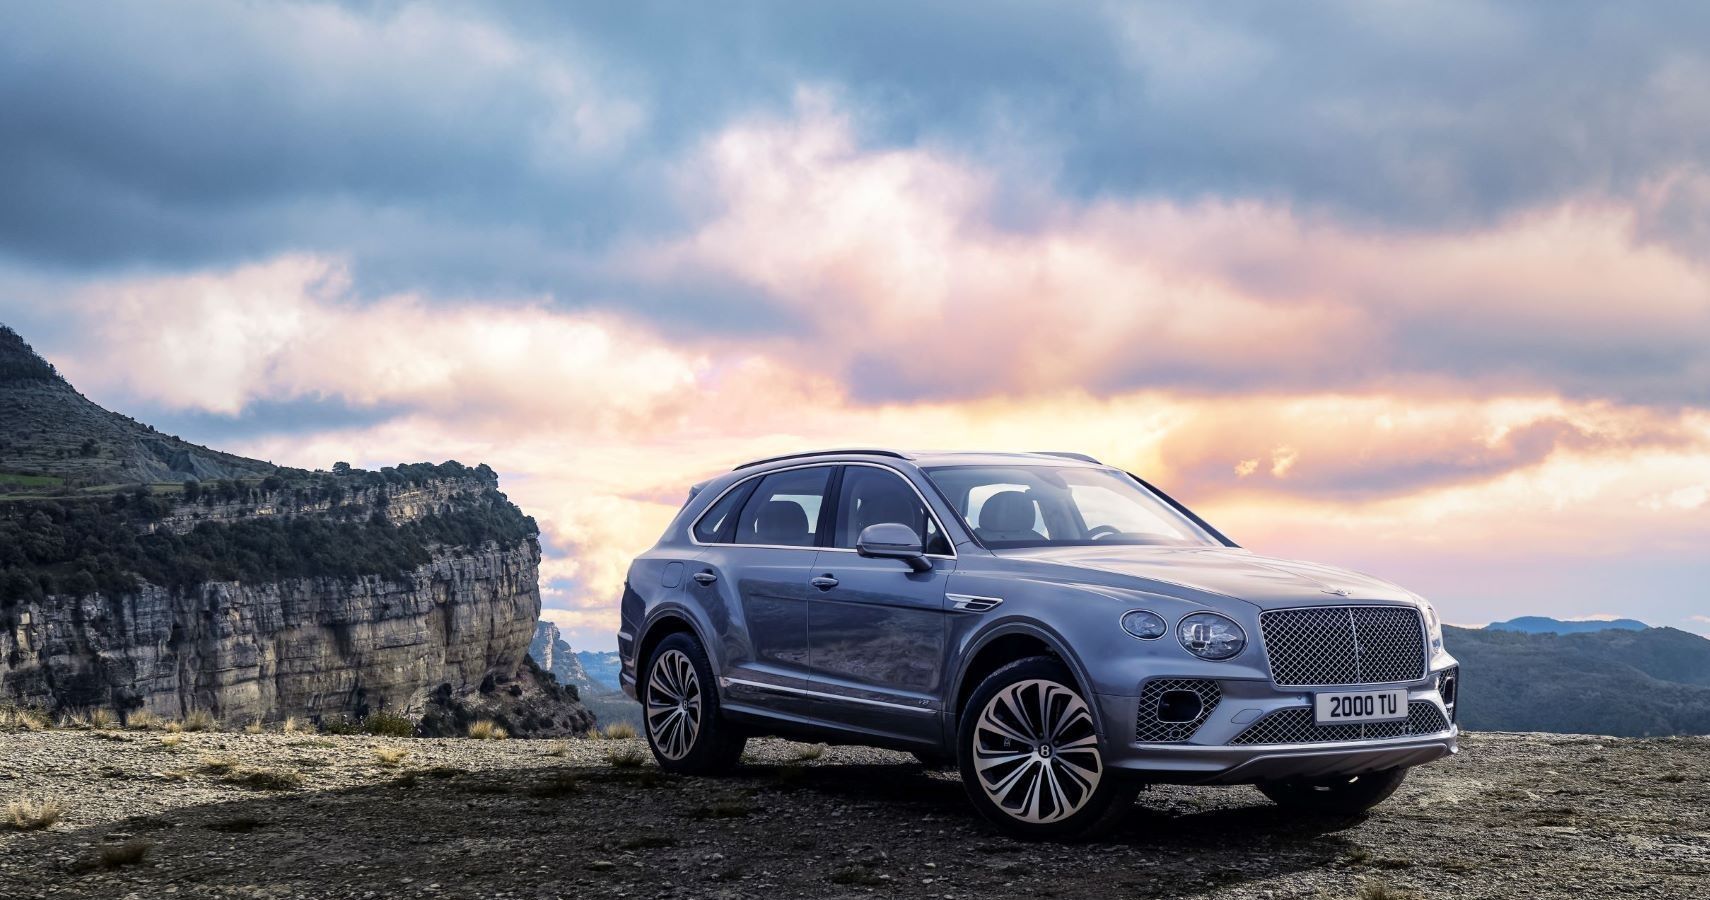 Bentley Bentayga in front of colorful sunset